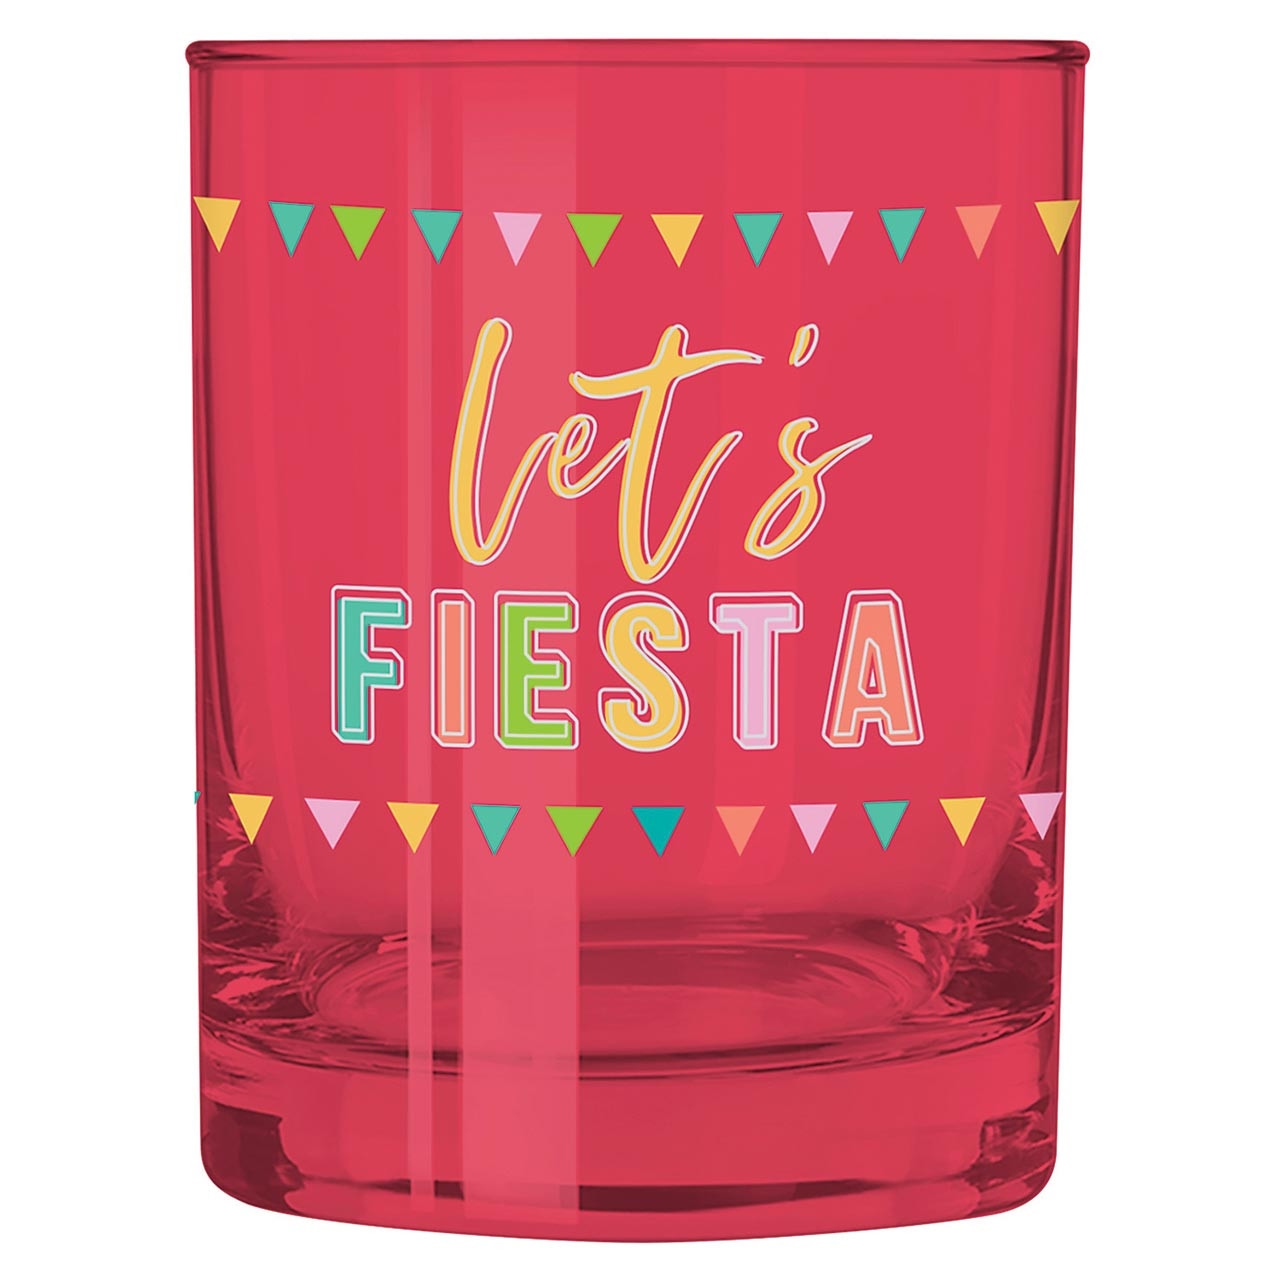 Let's Fiesta Design 12oz Double Old-Fashioned (DOF) Glasses (Set of 4)